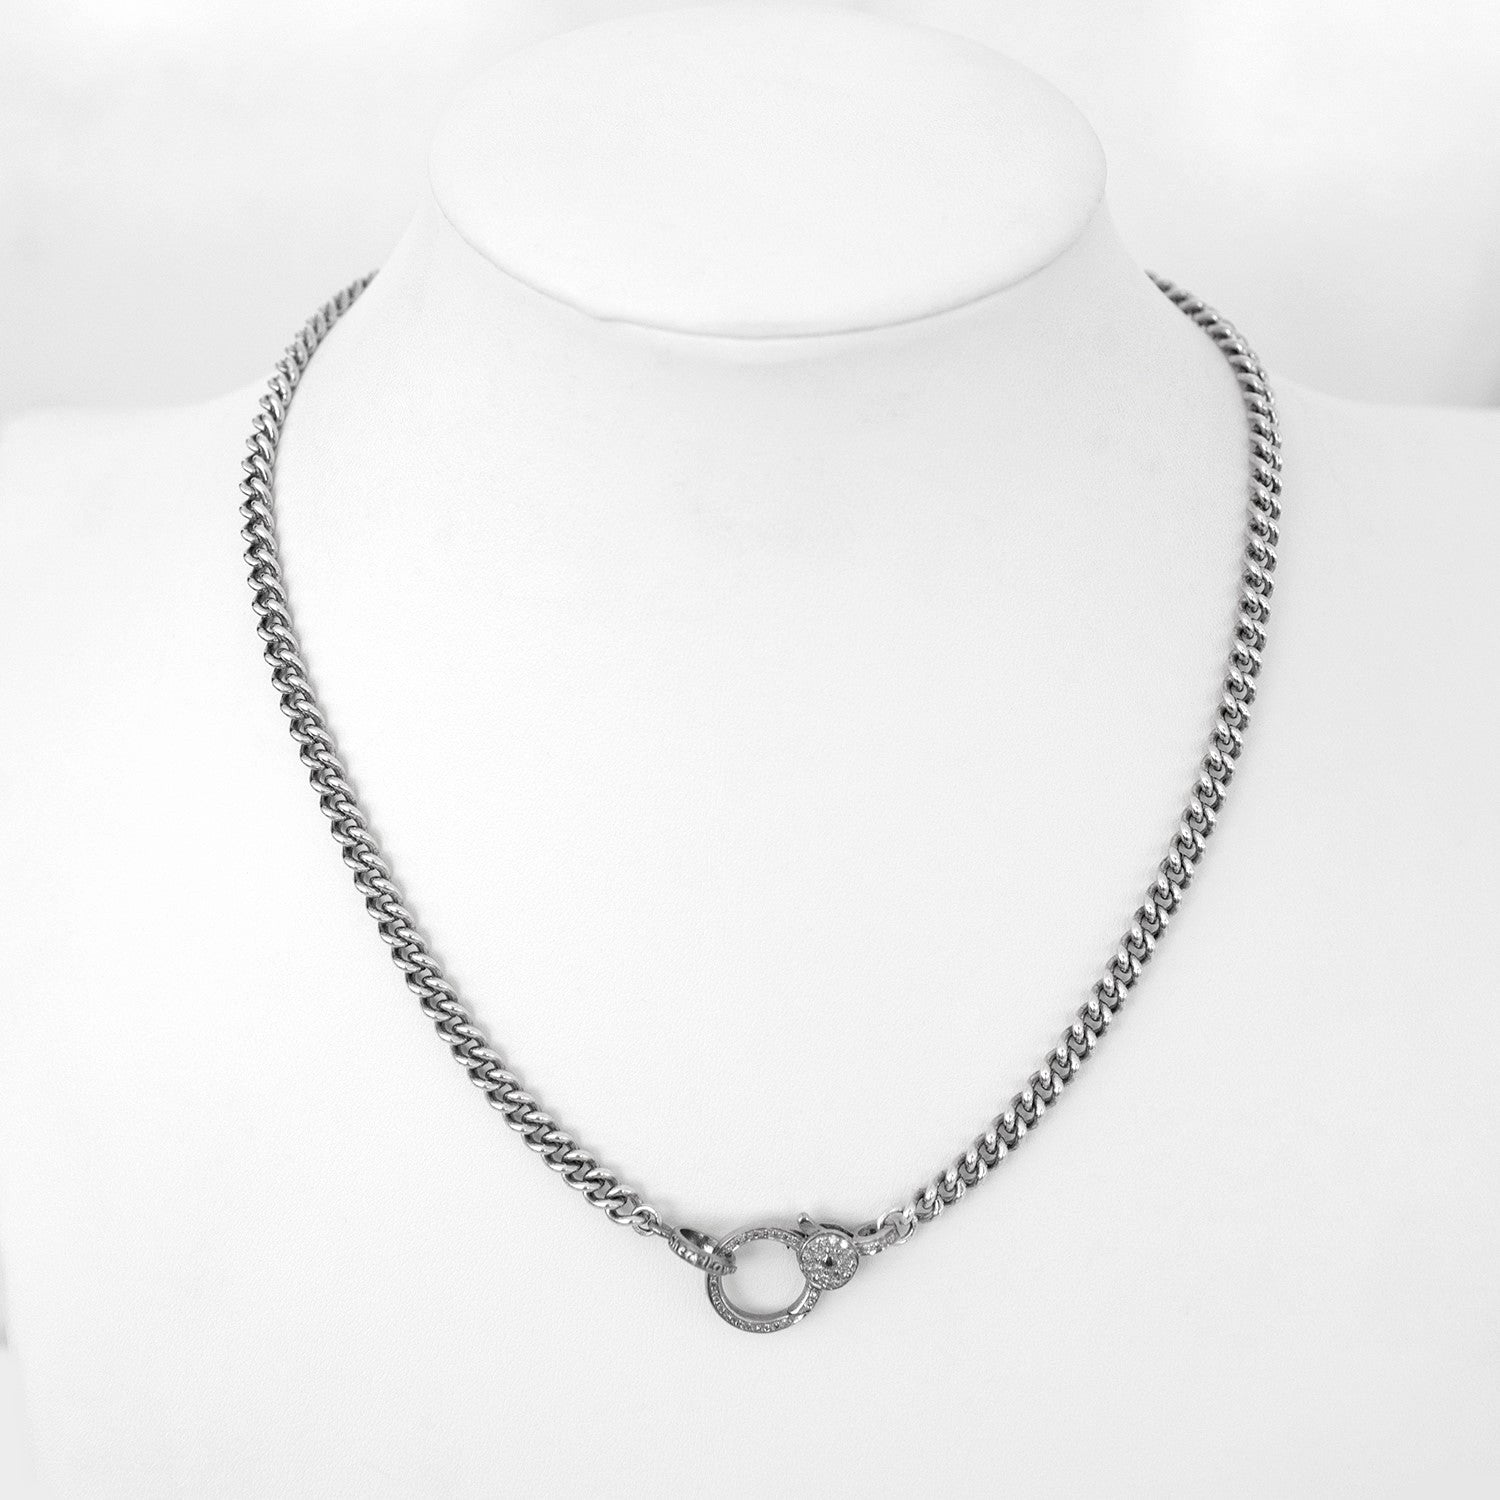 Short Curb Chain Necklace with Diamond Claw Clasp - 17" NB000086 - TBird